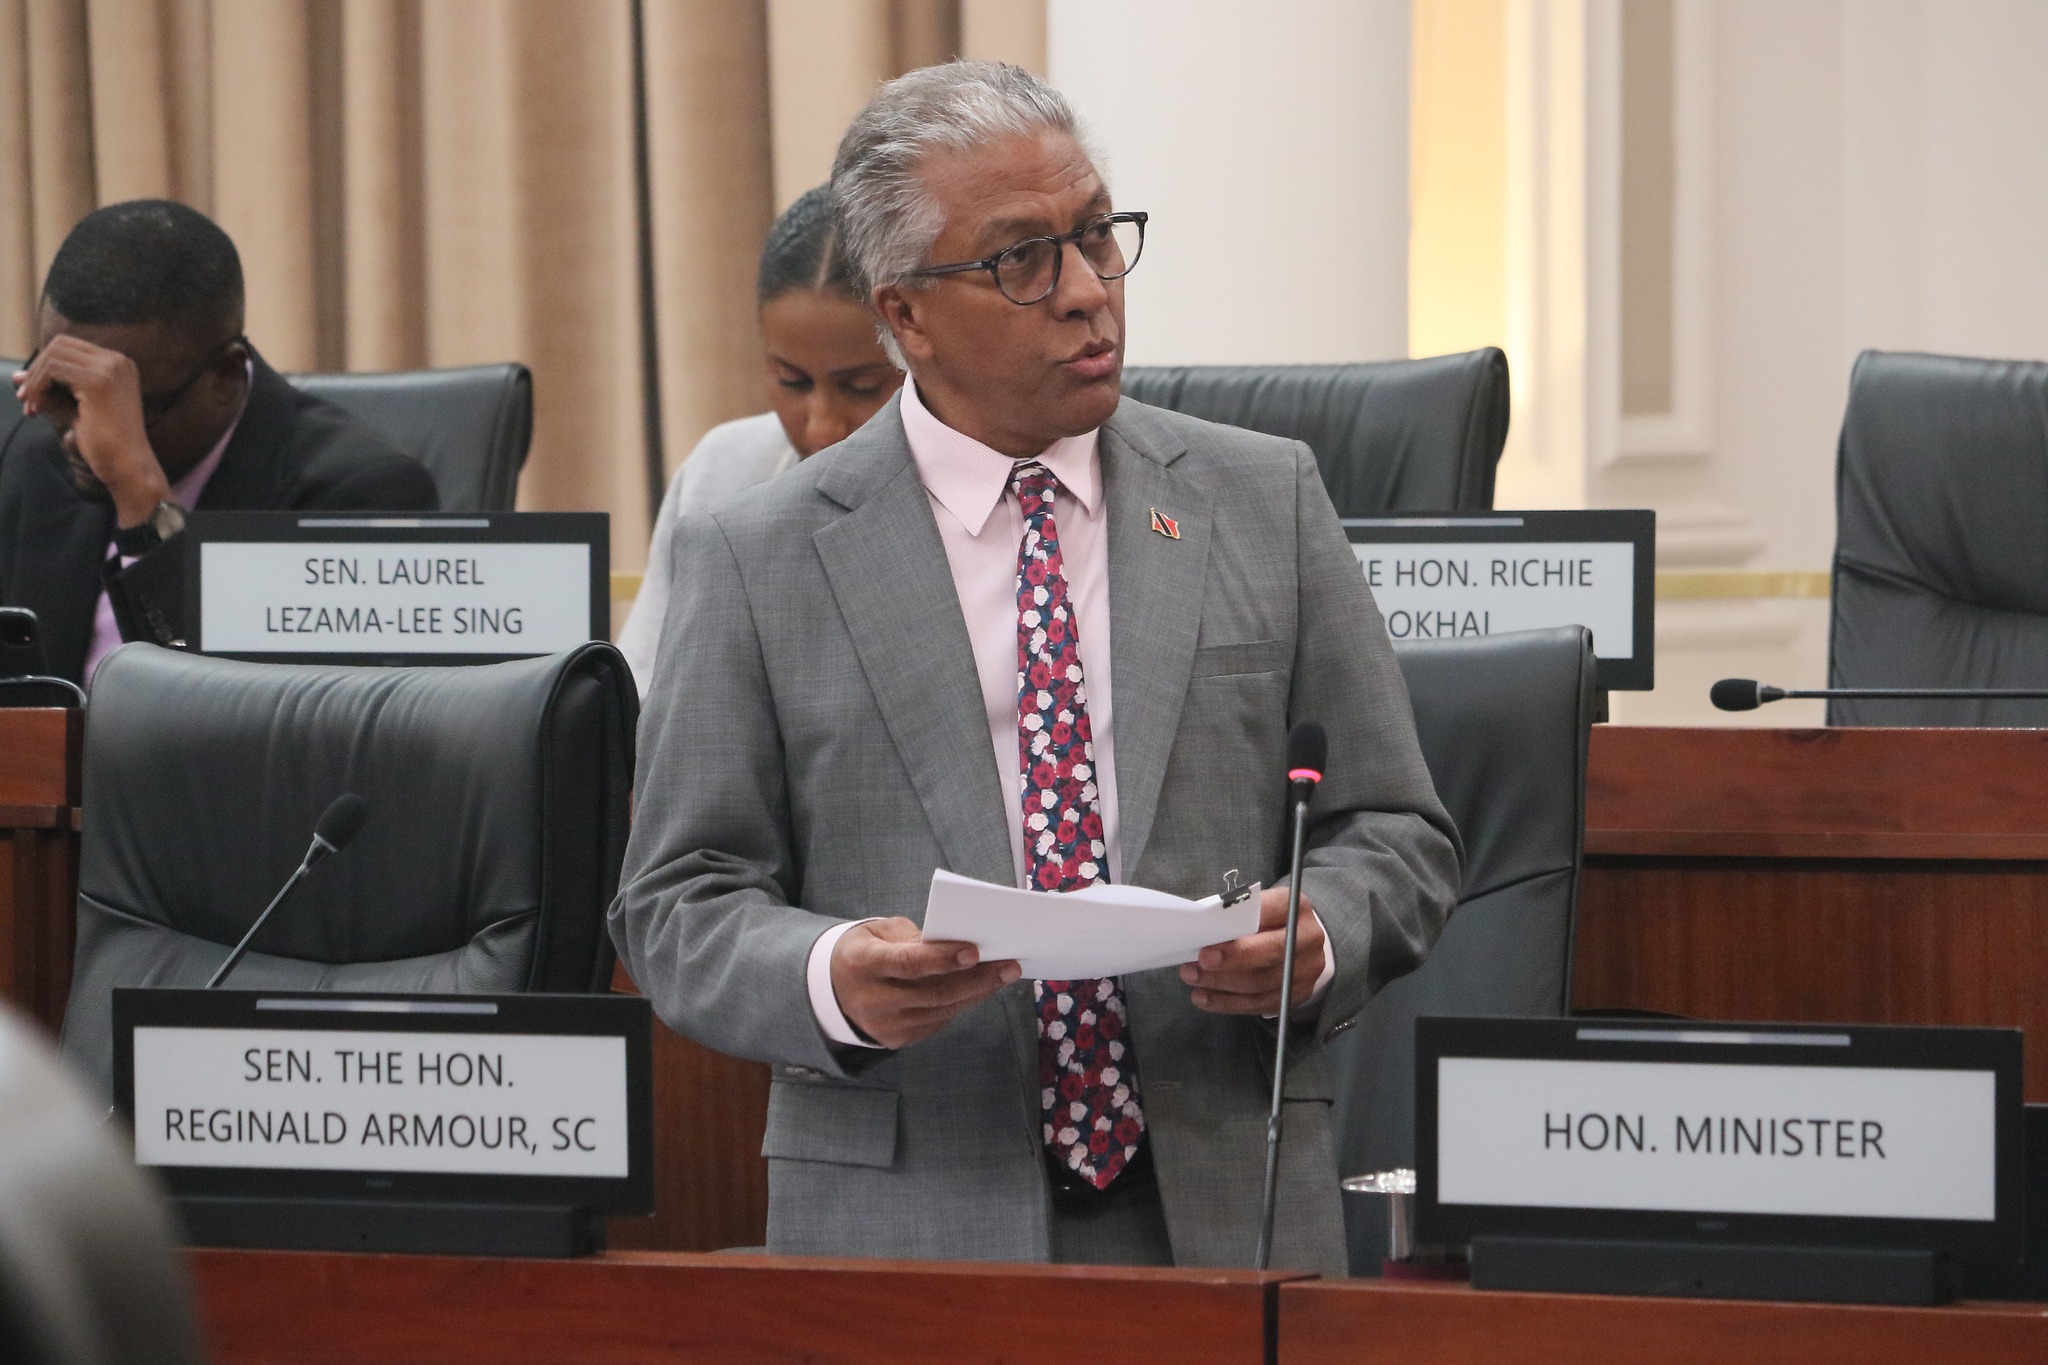 AG encourages Auditor General to proceed with good advice as motion to extend reporting period passed